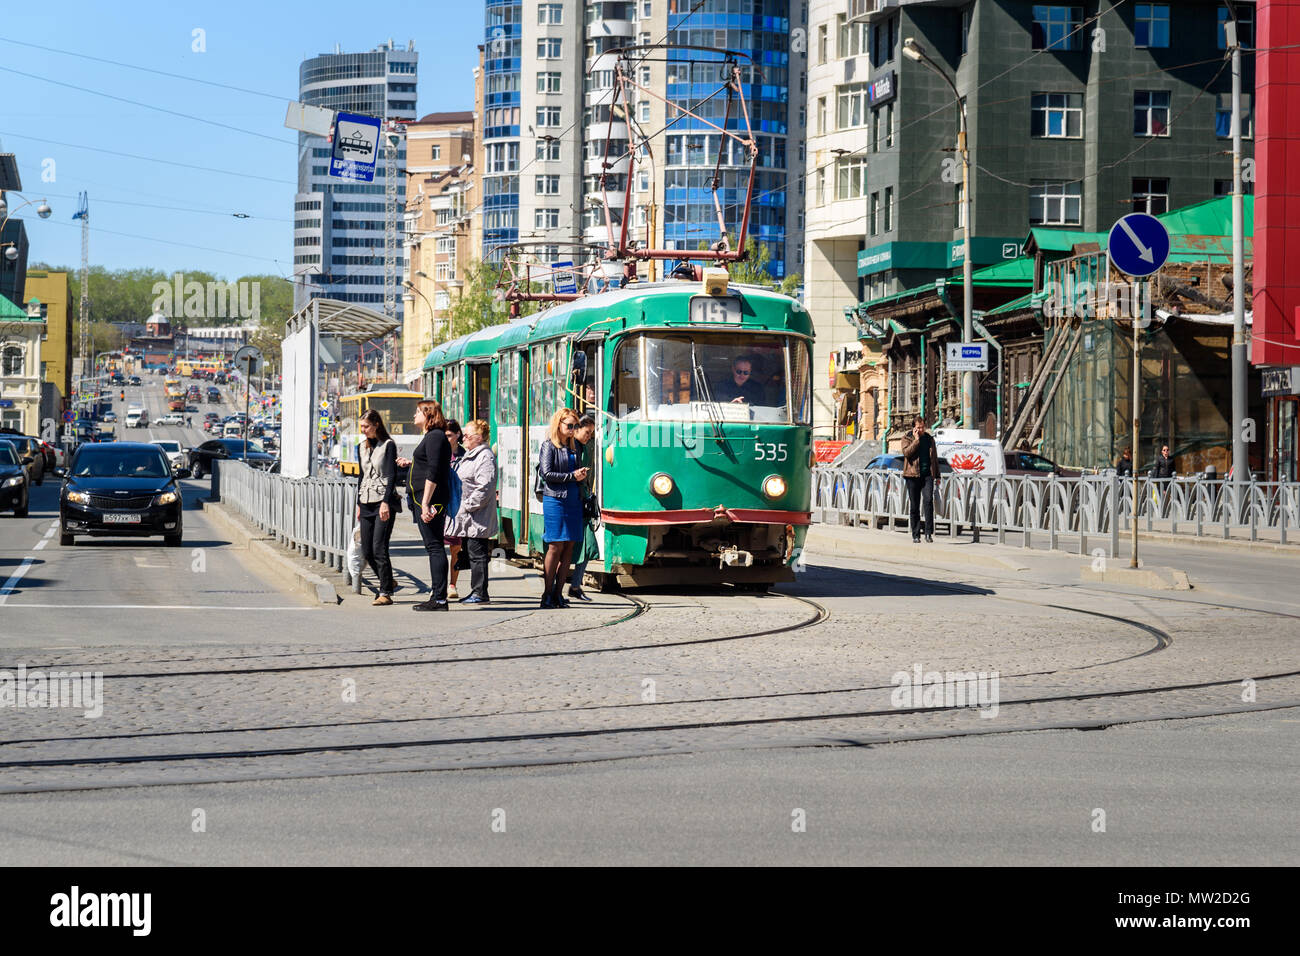 Yekaterinburg, Russia - May 23, 2018: Green tram on tramway stop on the street Stock Photo